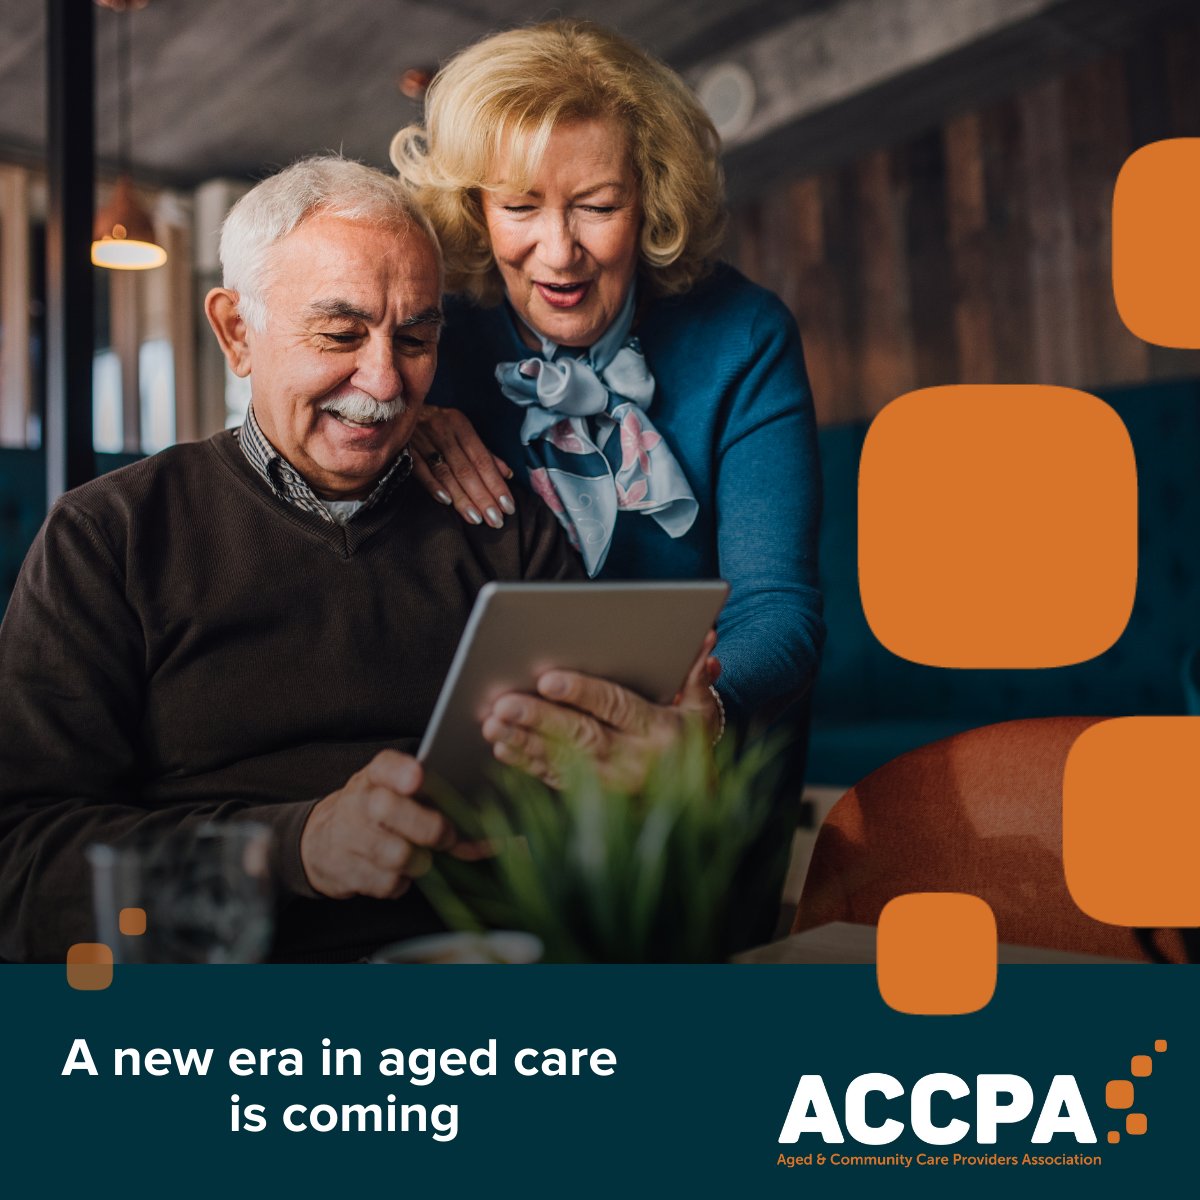 A new era in #agedcare is coming! From this Friday 1 July, ACSA will be winding down as the new, unified industry association for all aged care providers begins. Follow this strong new voice in aged care here: @ACCPAAustralia